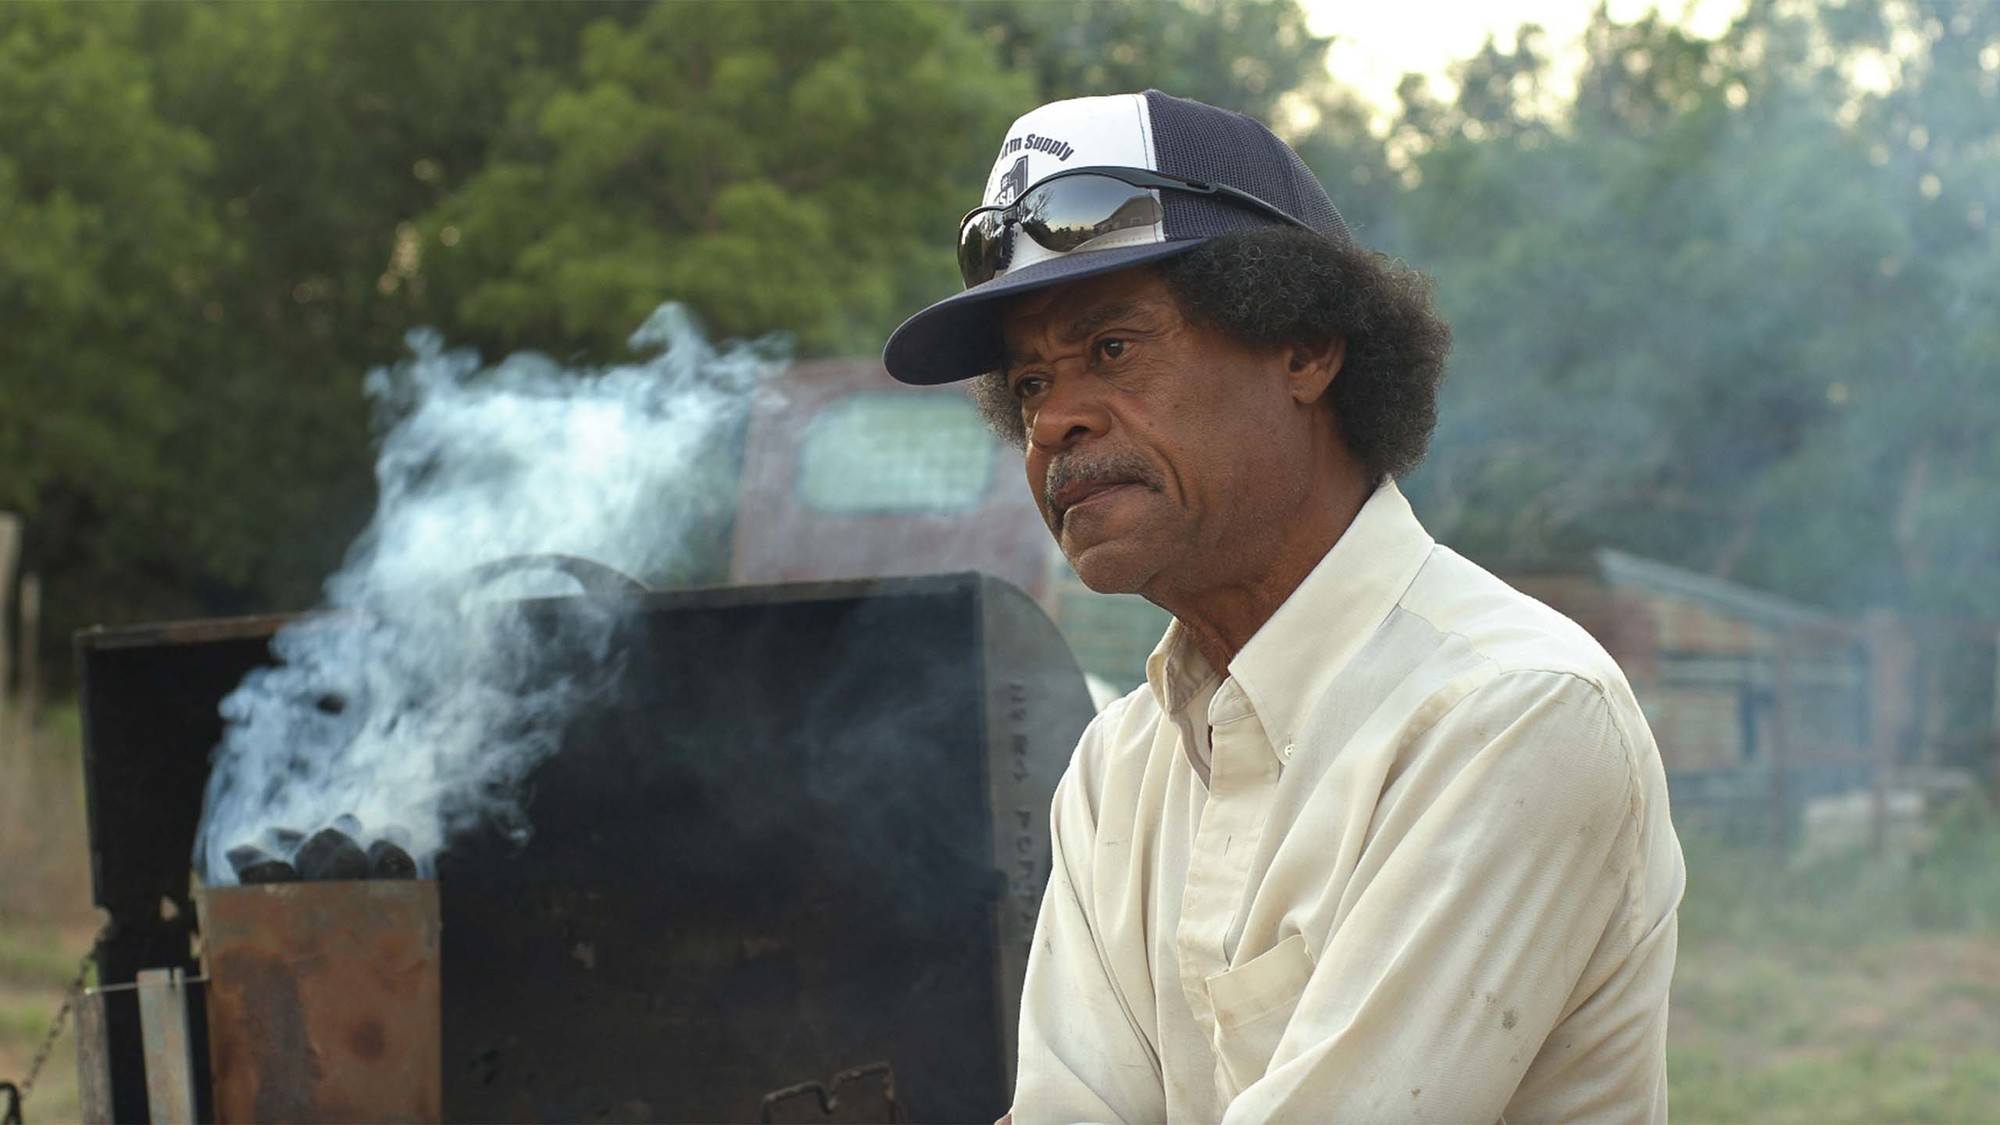 Jimi Vivens, pictured in July 2019 resting after a day’s work, has been farming in rural Texas for more than four decades.